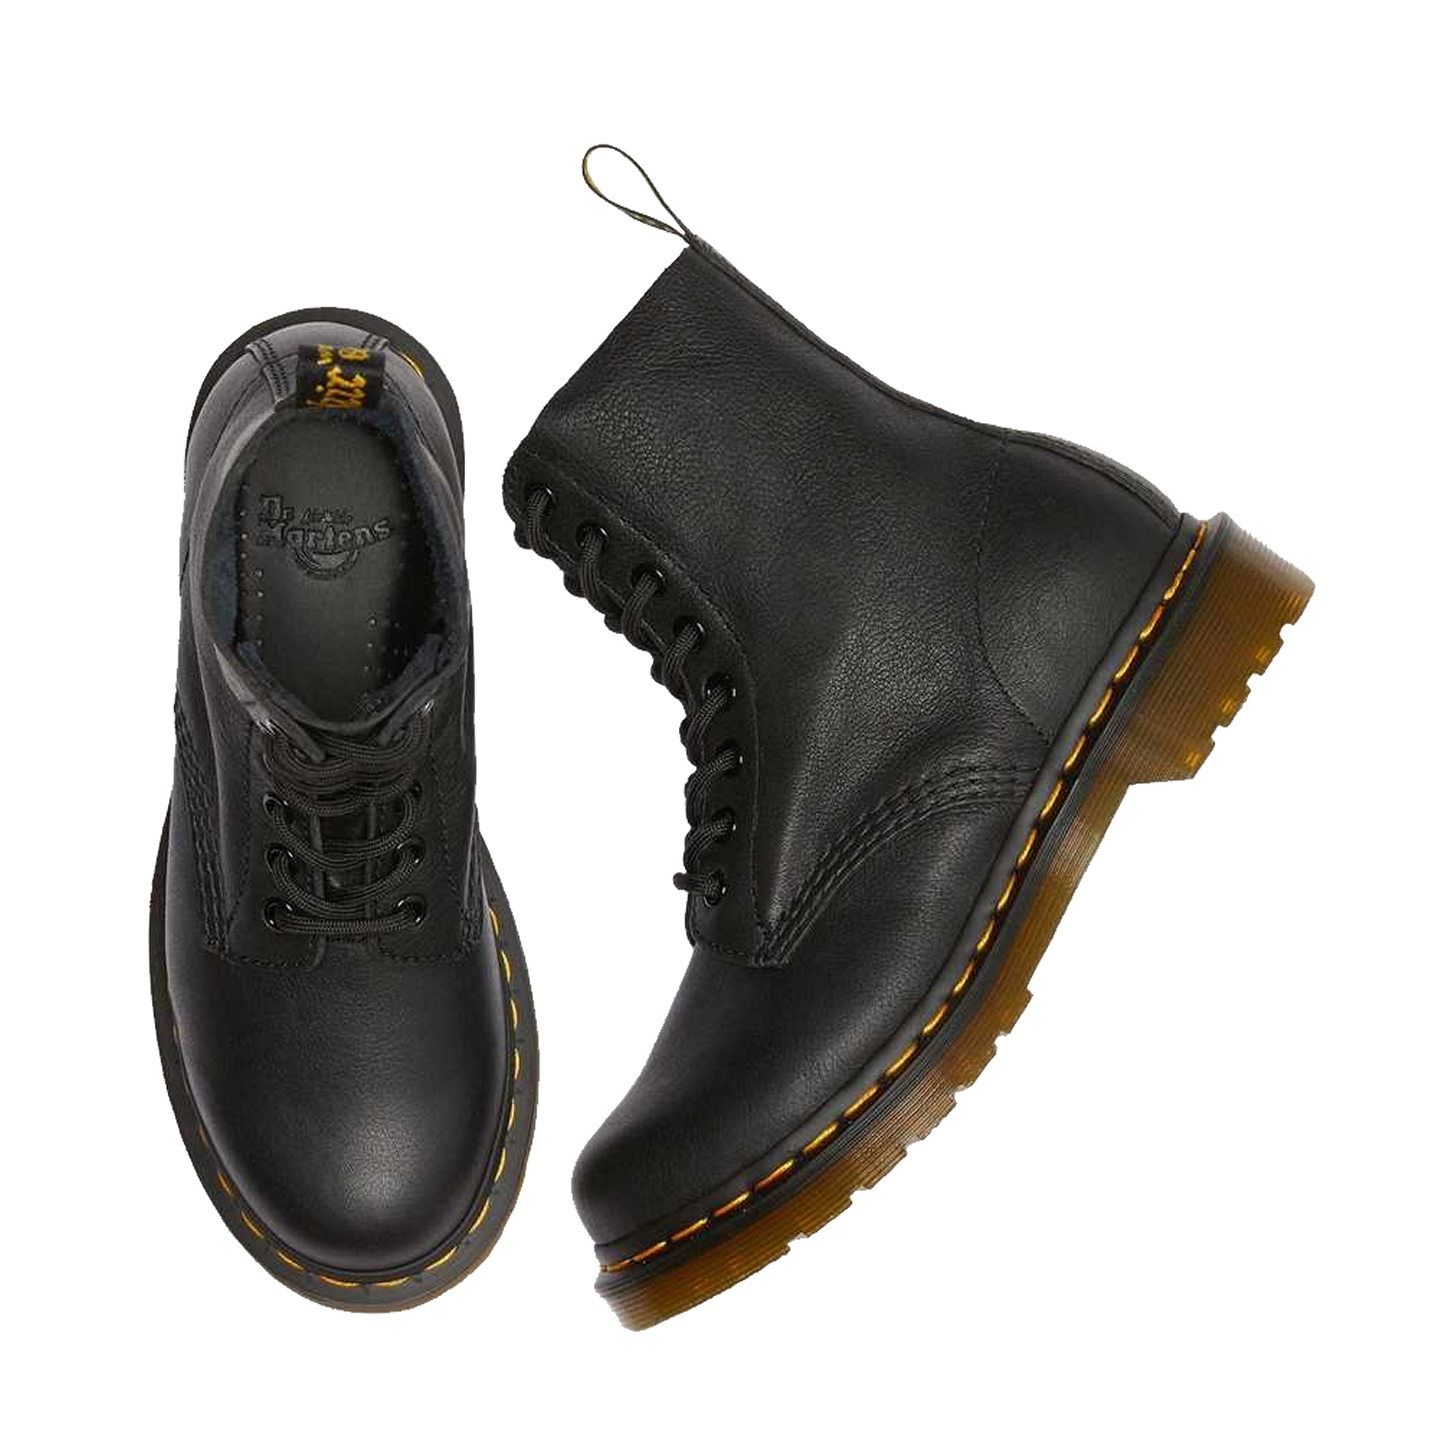 W) 1460 PASCAL - BLACK VIRGINIA LEATHER | DR. MARTENS - Momentum